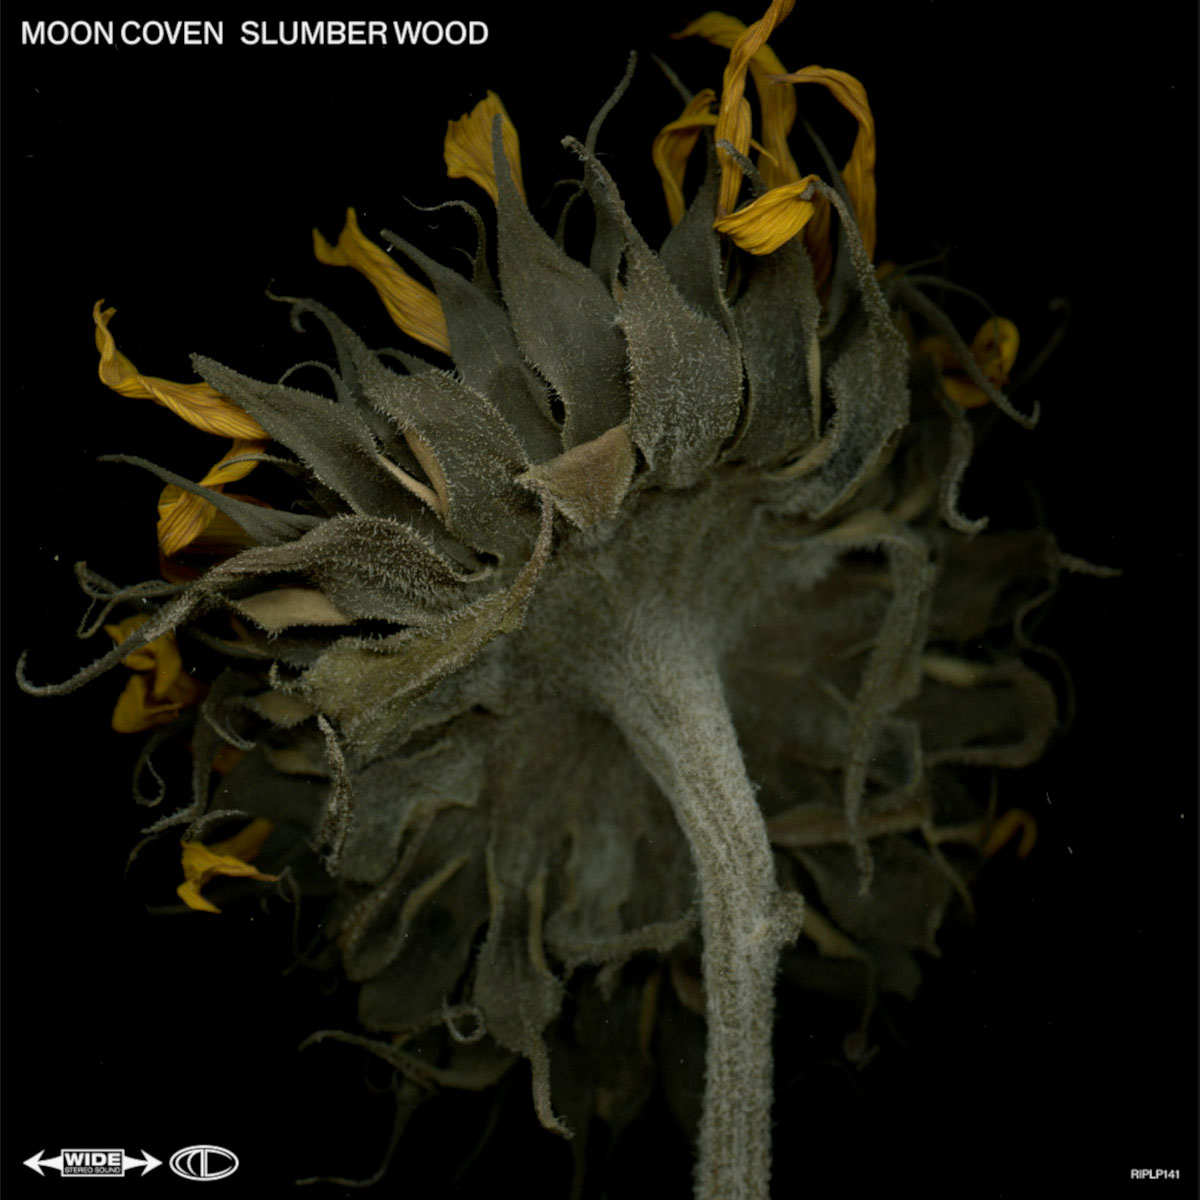 Slumber Wood by Moon Coven